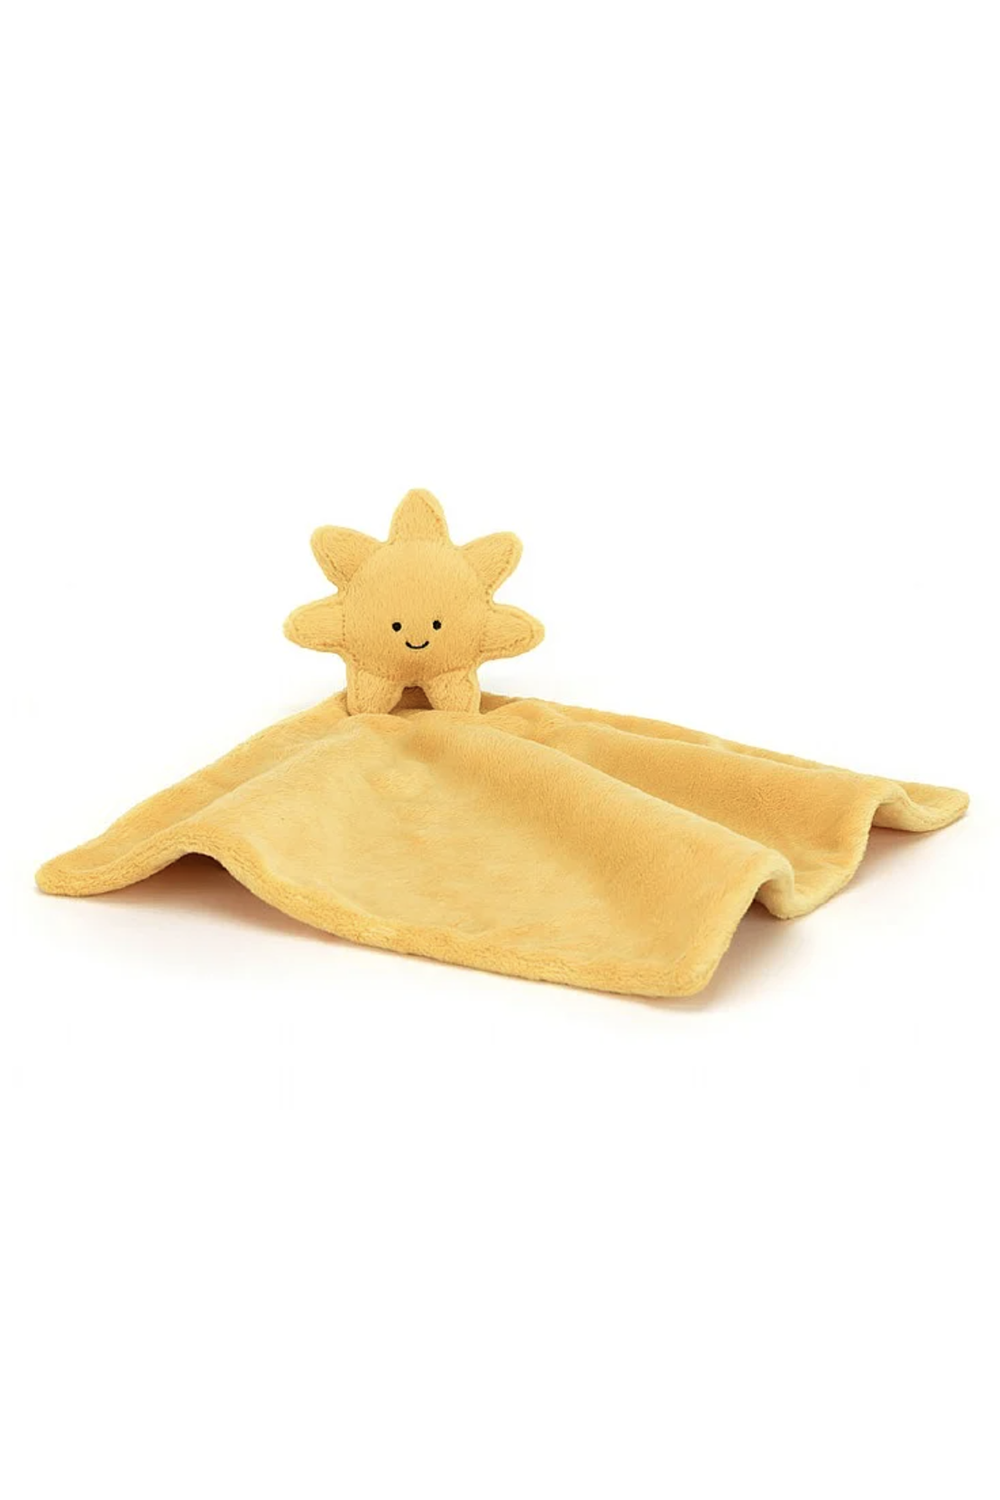 JELLYCAT Amuseable Soother - Sun